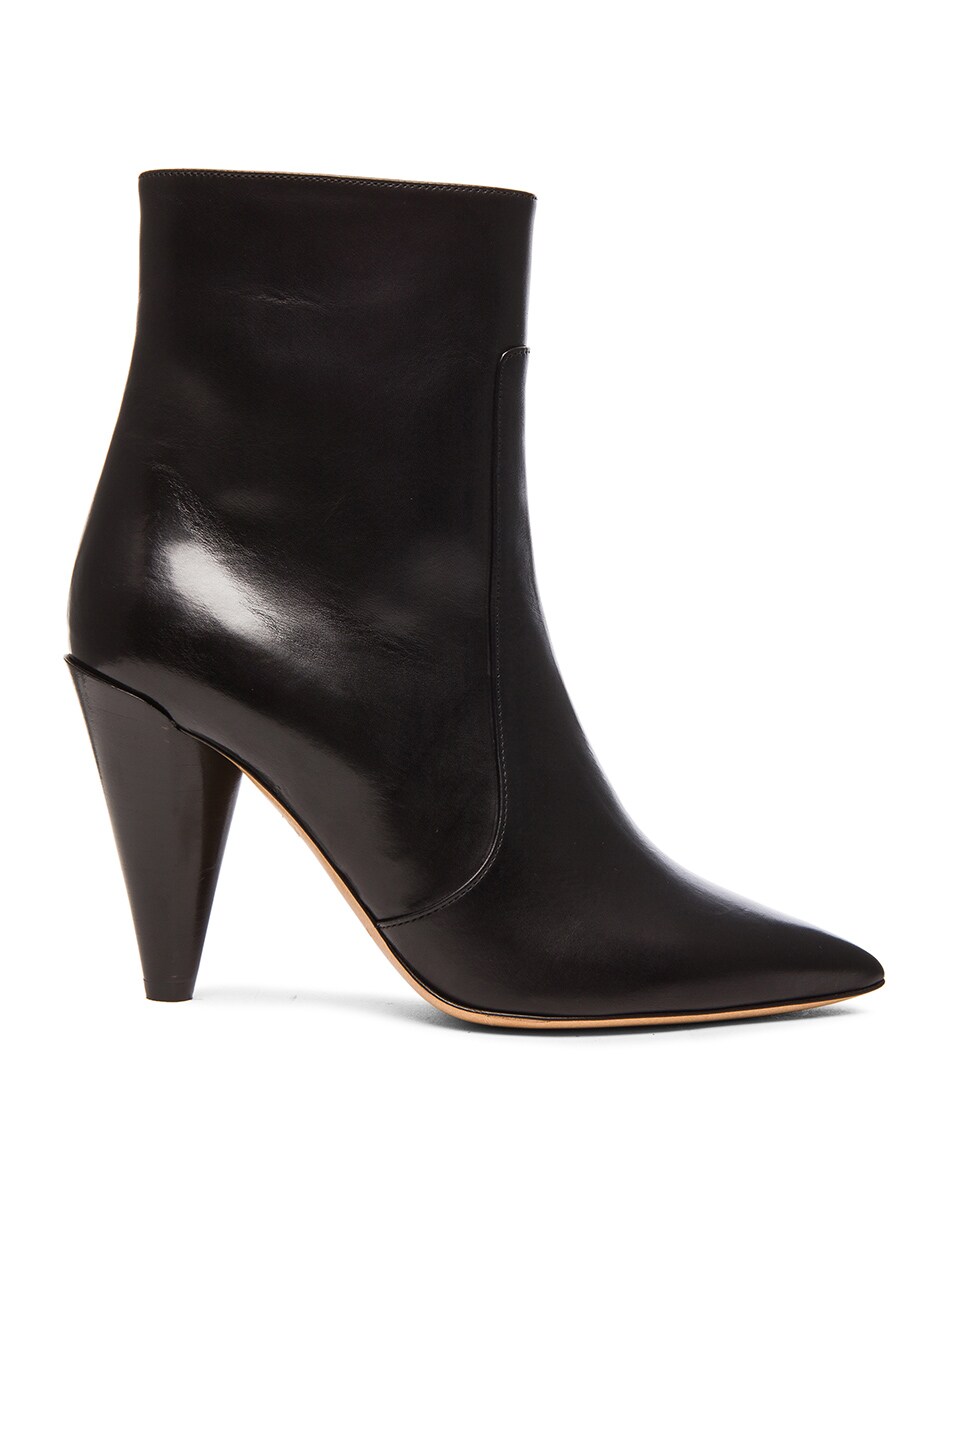 Image 1 of Isabel Marant Naelle Leather Boots in Black